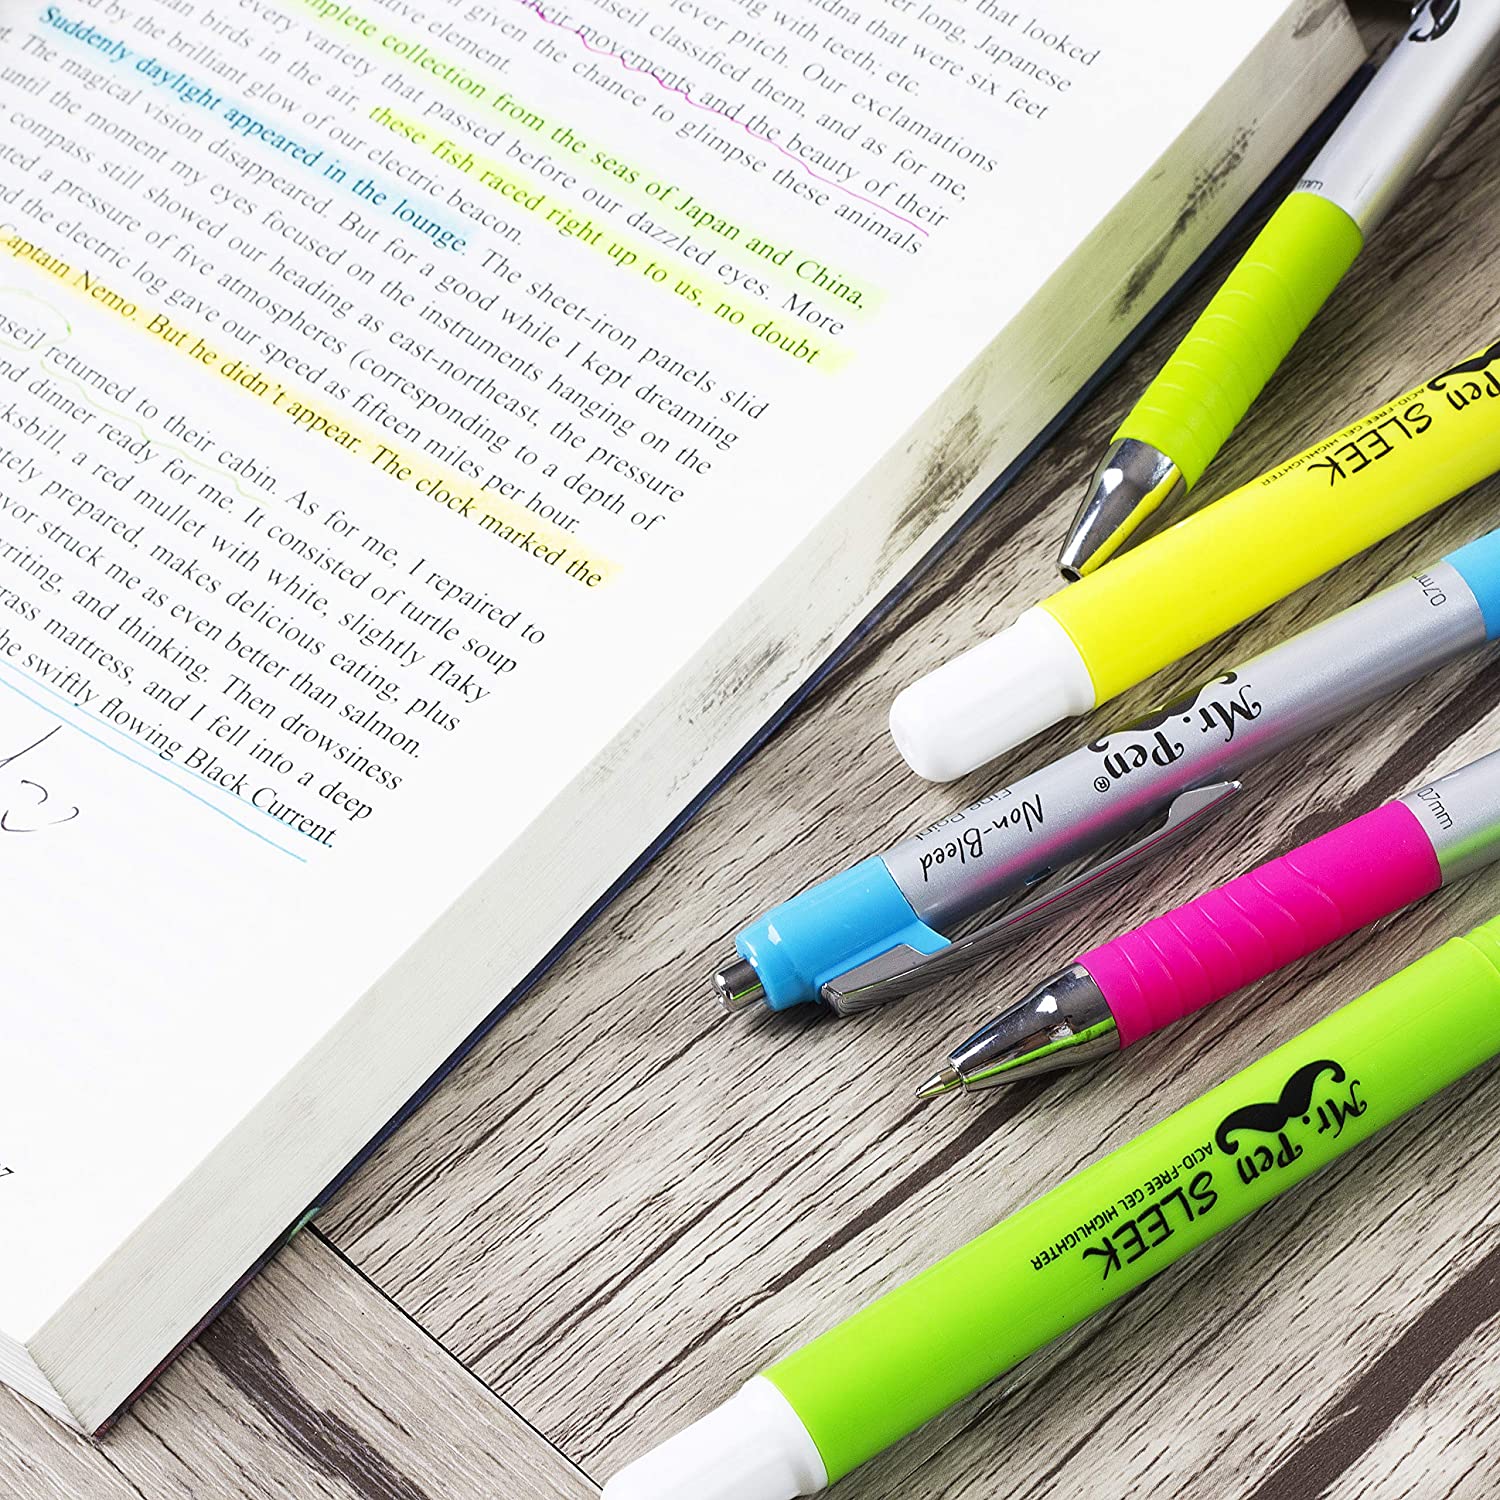 Mr. Pen- Bible Highlighters and Pens No Bleed, 8 Pack, Pastel, Gel Highlighters, Bible Pens No Bleed Through, Bible Highlighters No Bleed, Bible